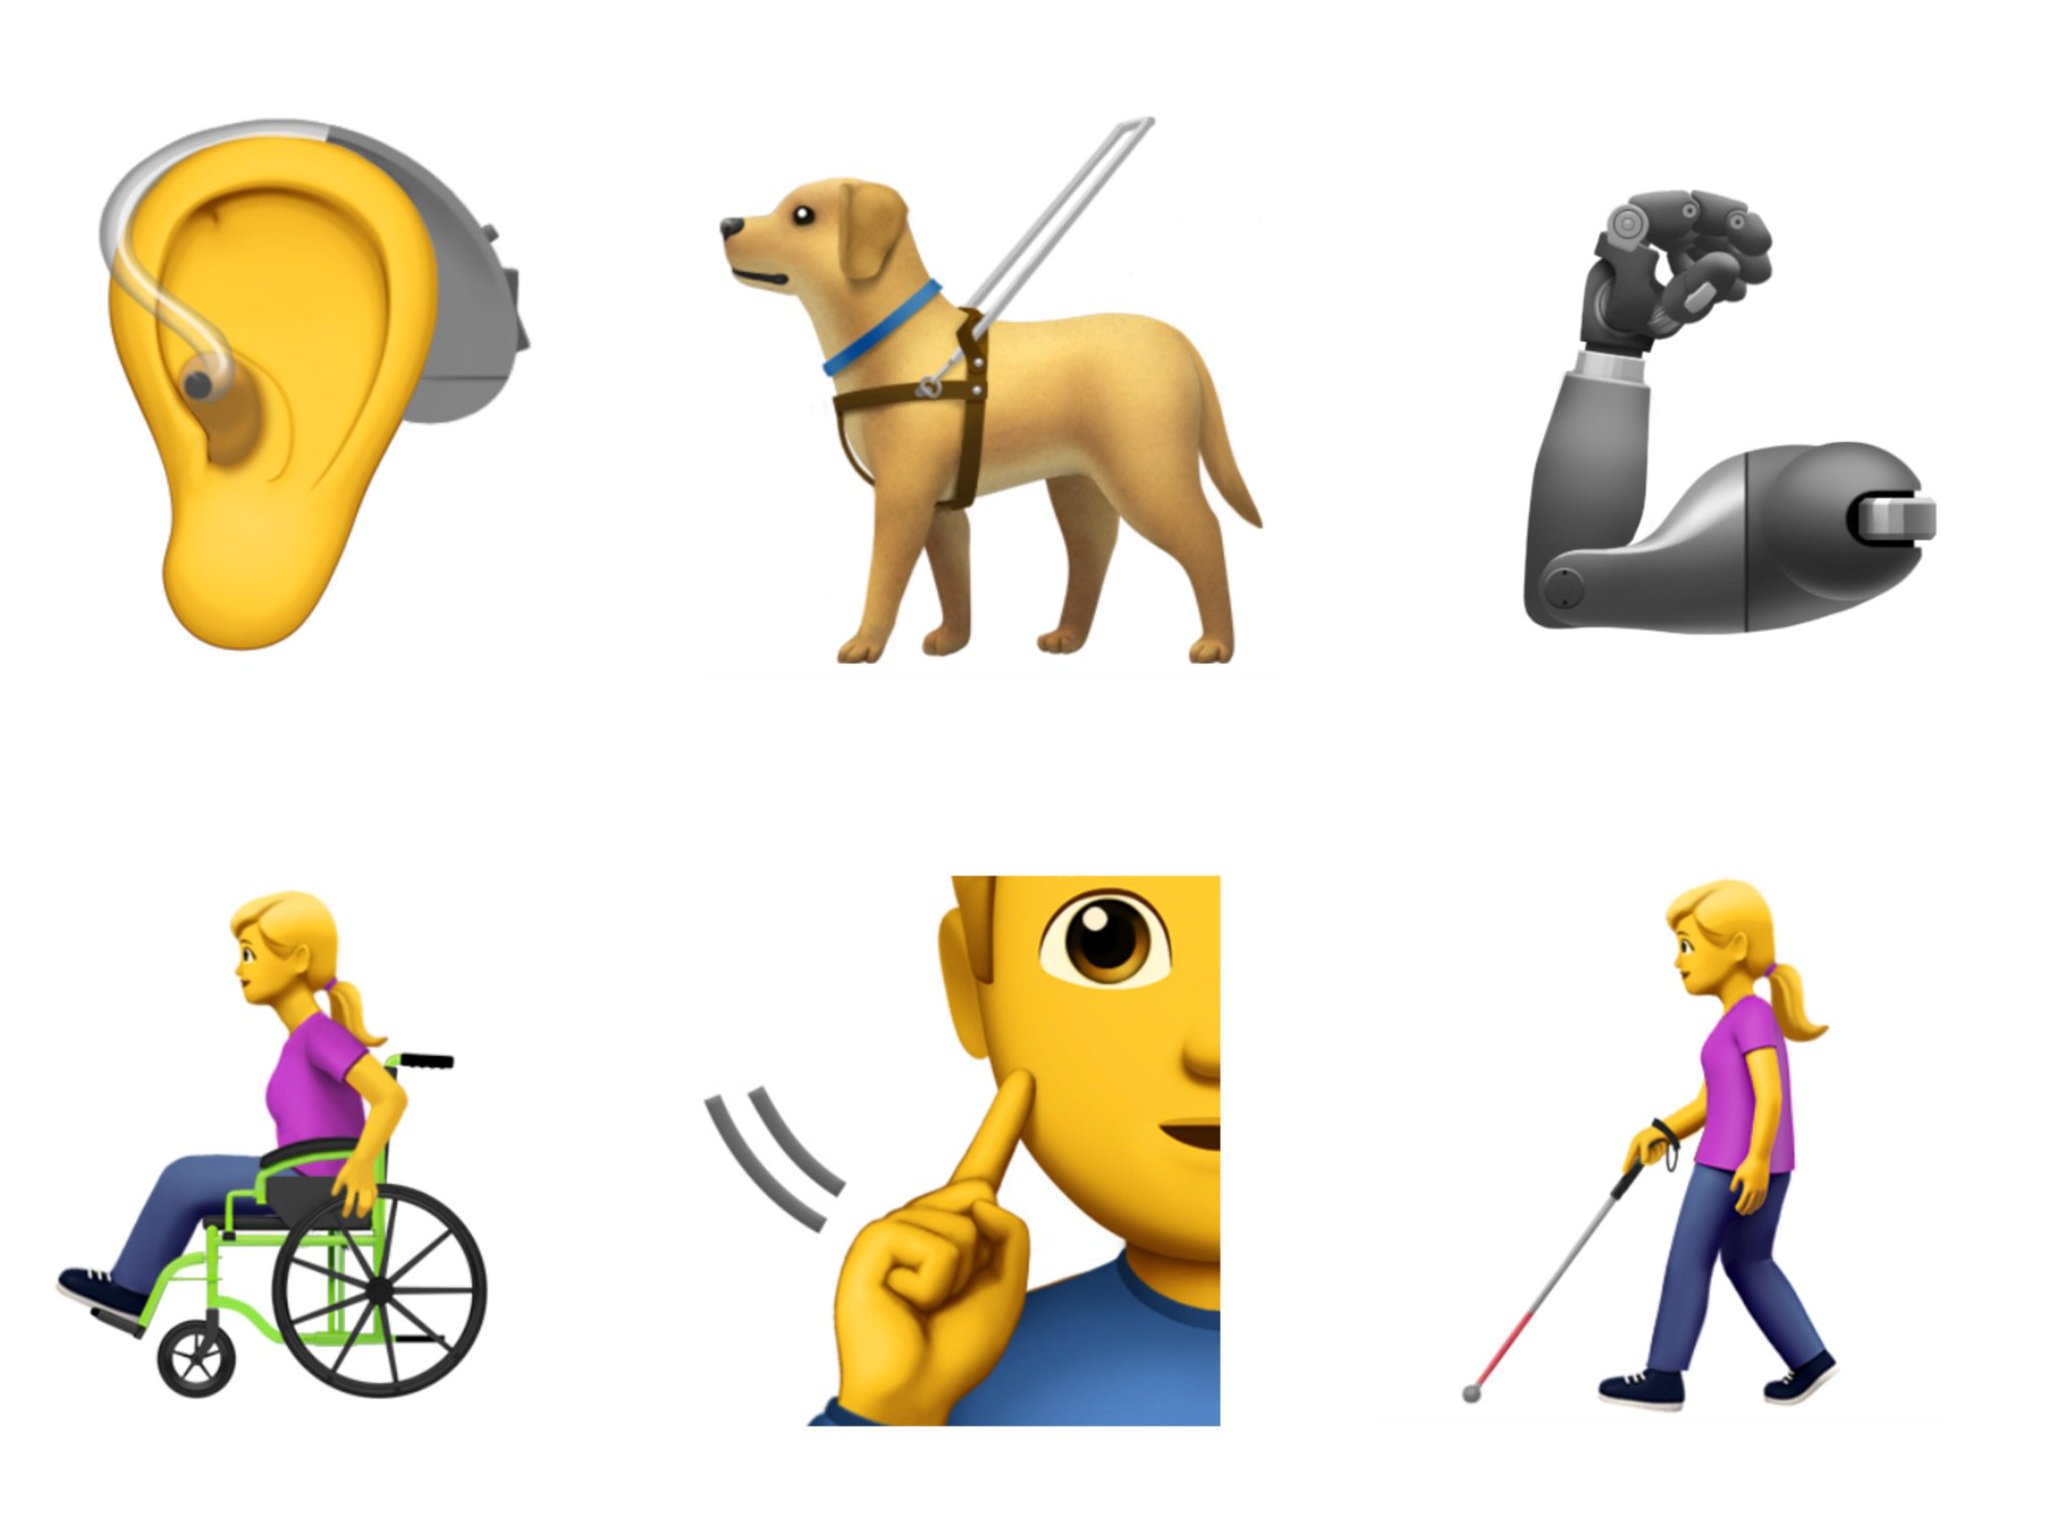 A guide dog and several other emojis to be added. 